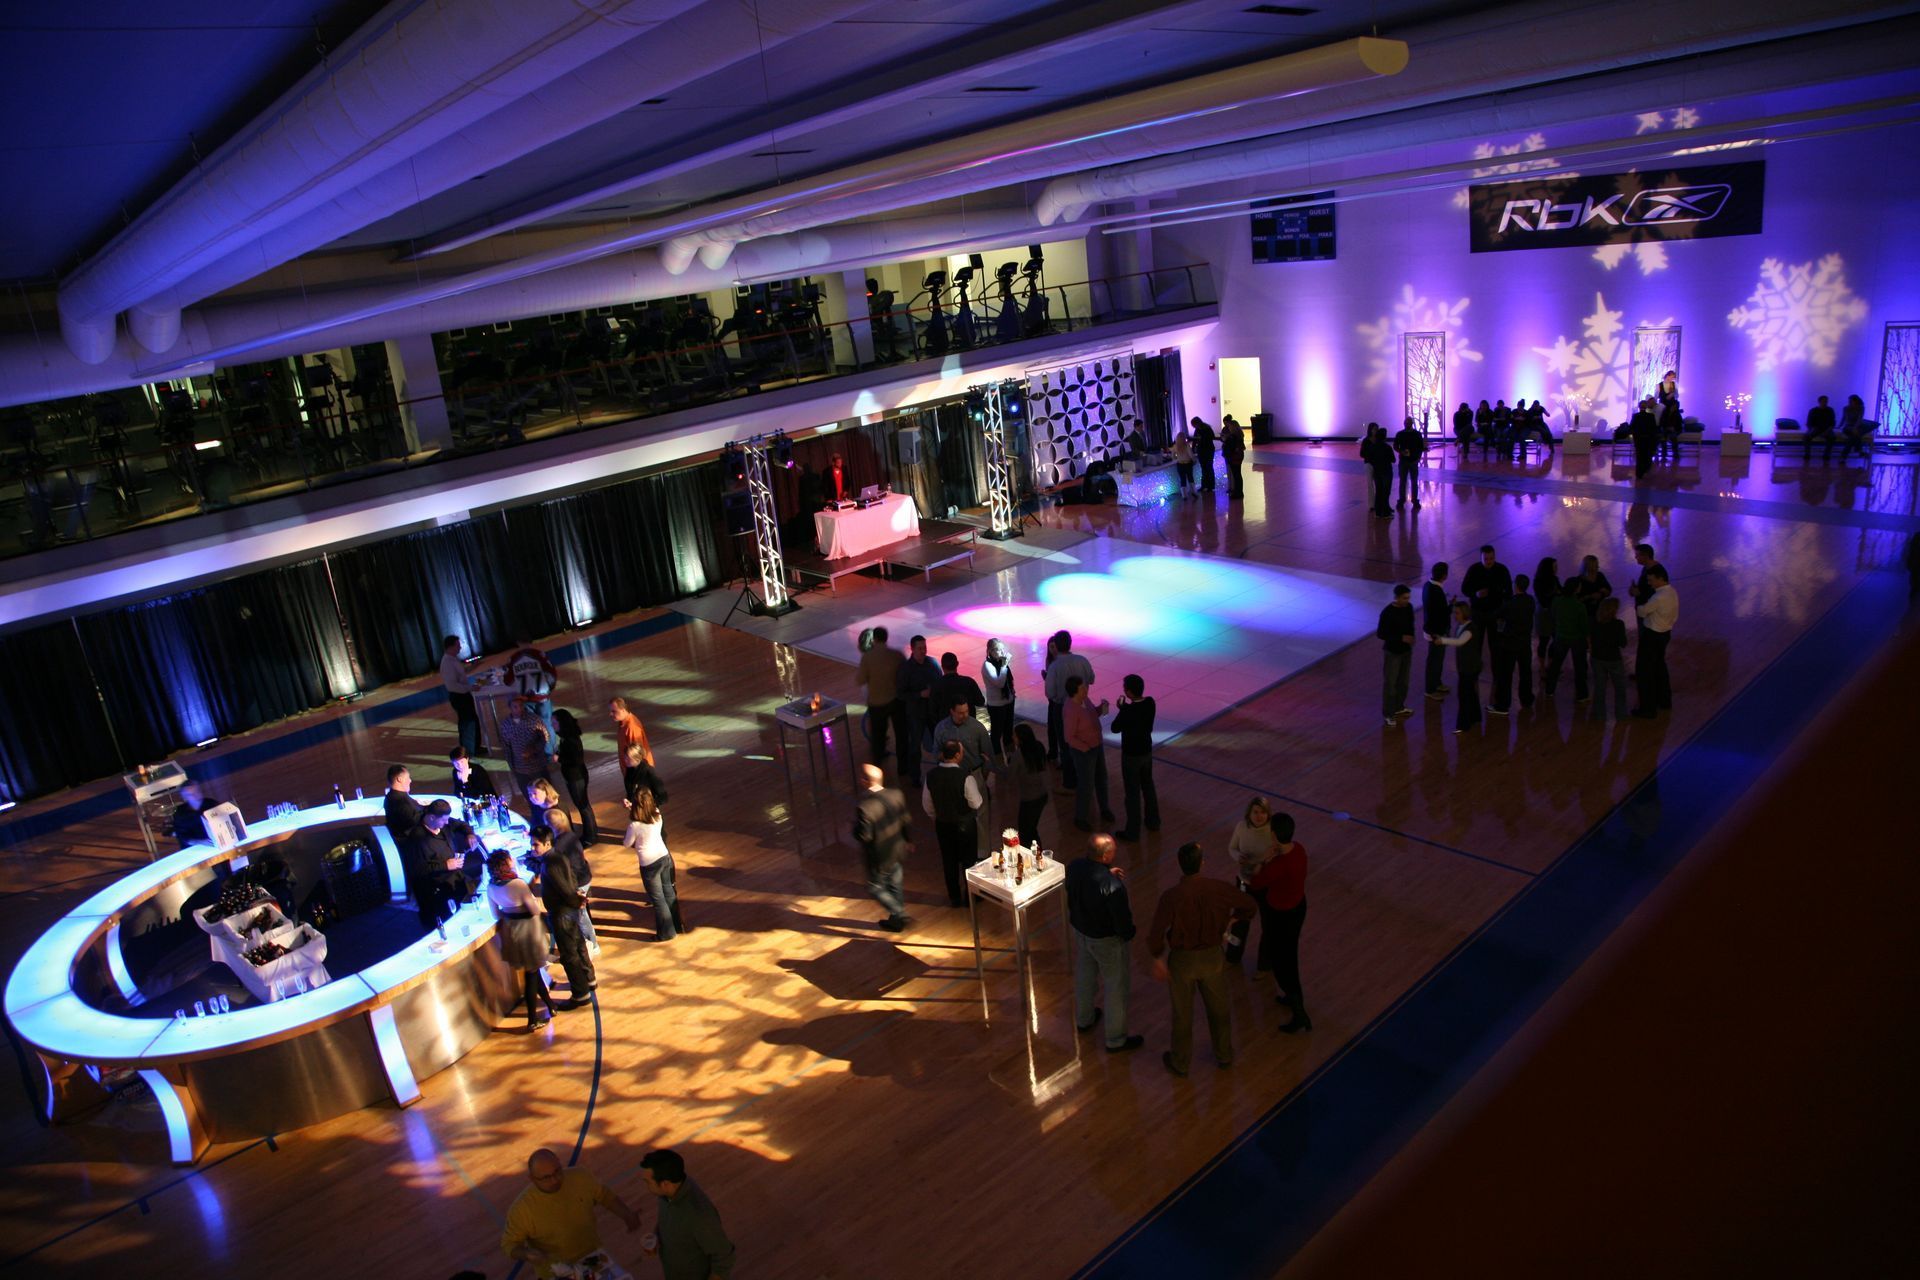 An aerial view of a large room with people dancing on a dance floor.